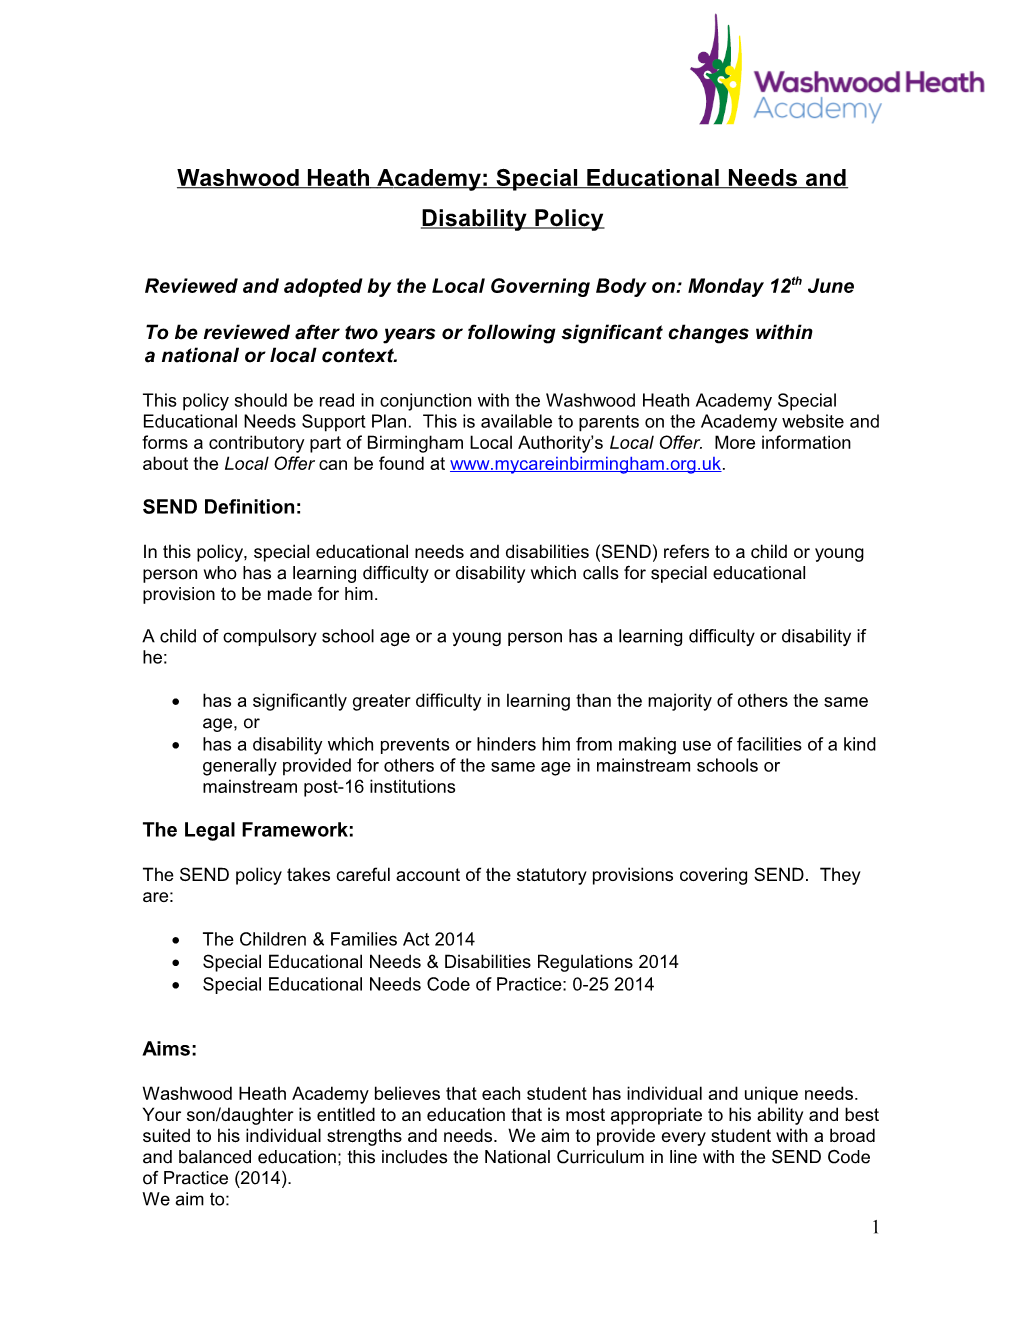 Washwood Heathacademy:Special Educational Needs and Disability Policy